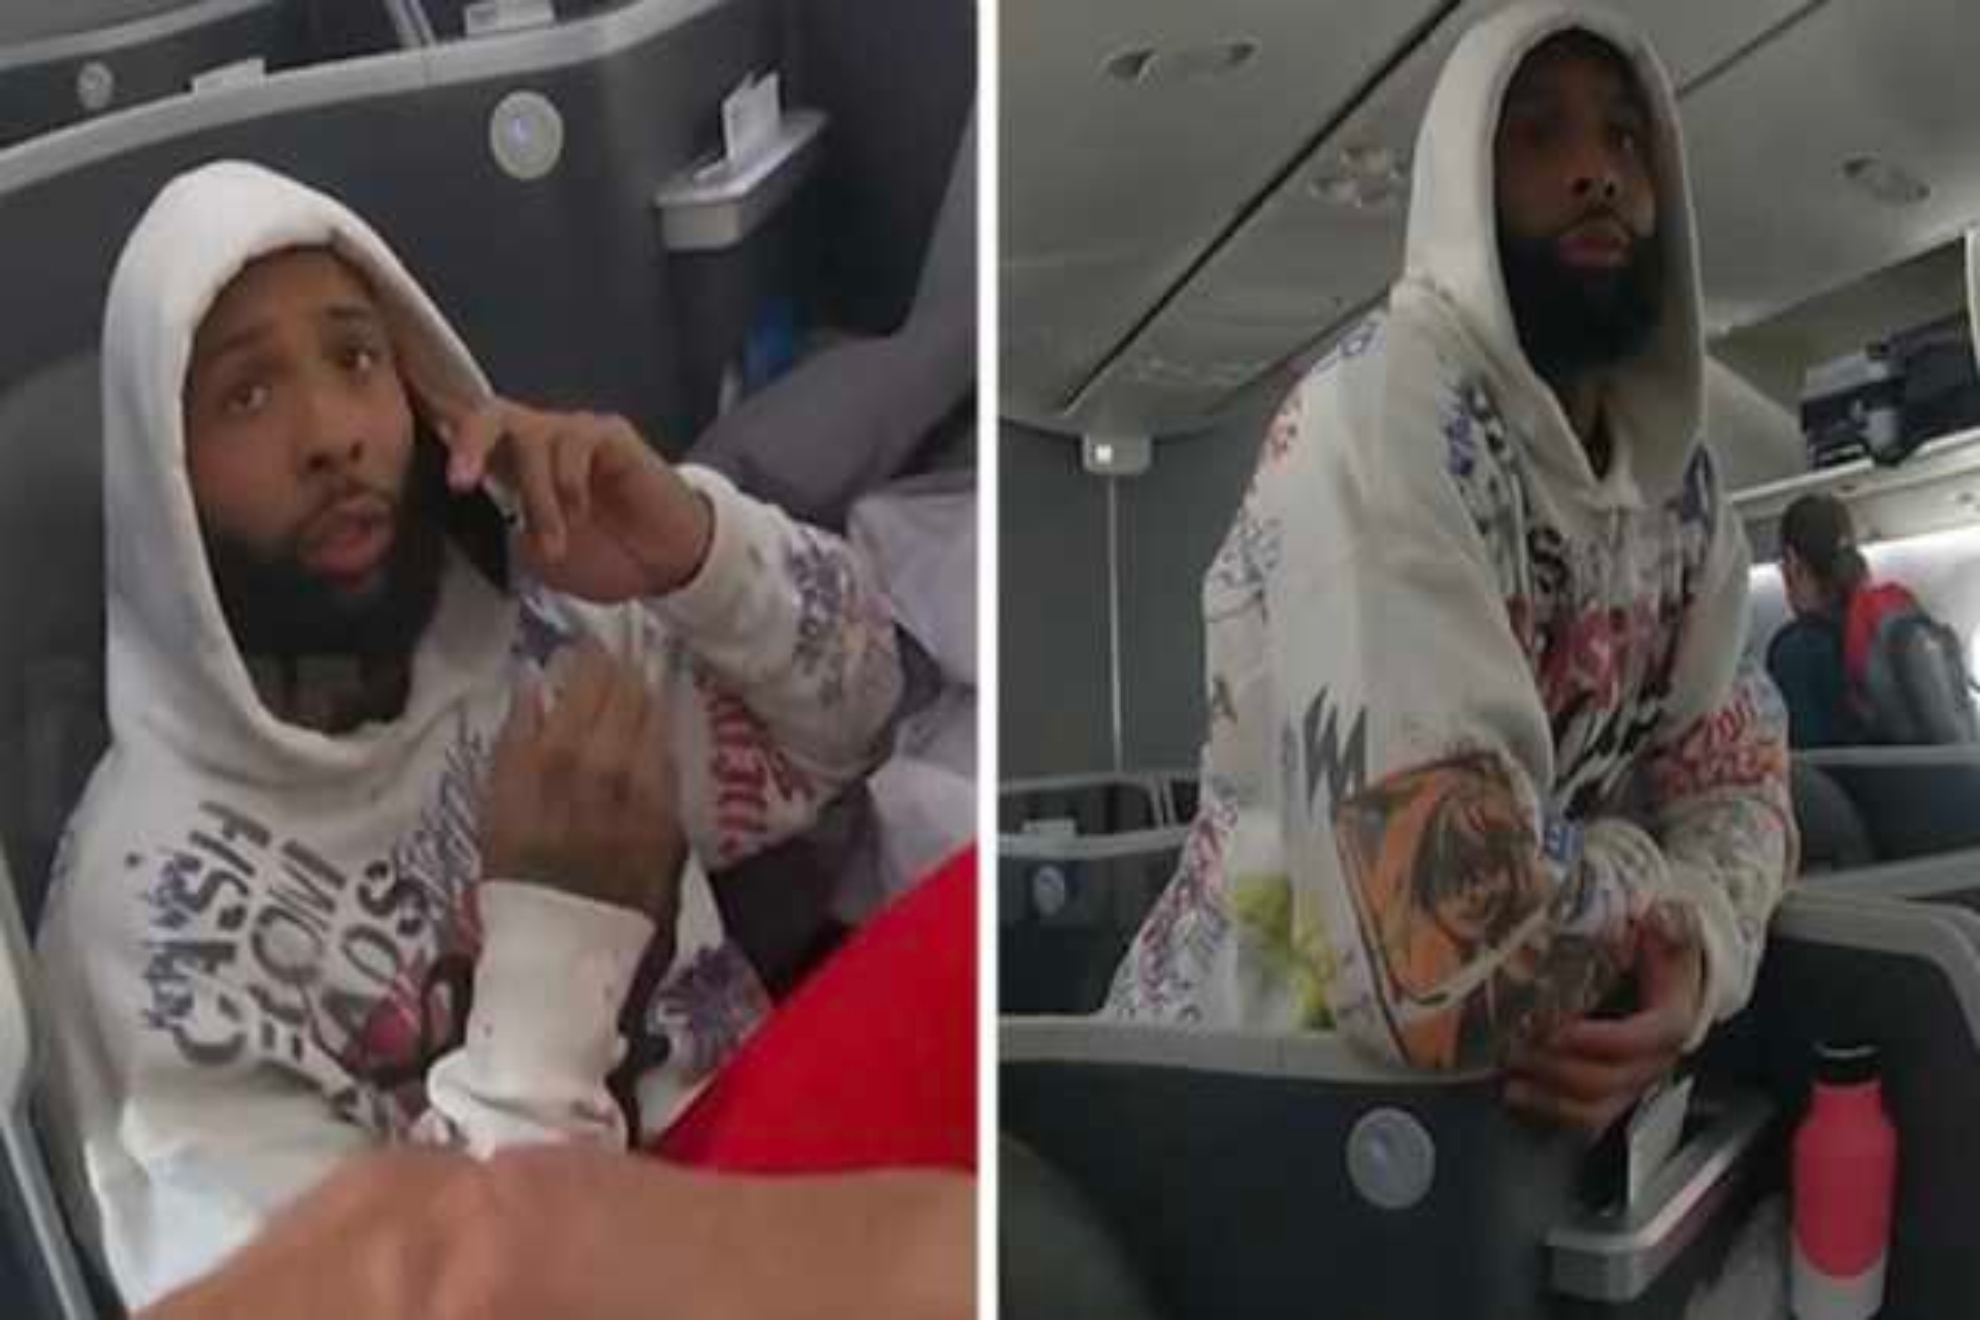 Odell Beckham Jr yelled at passenger during a plane incident as revealed by police video